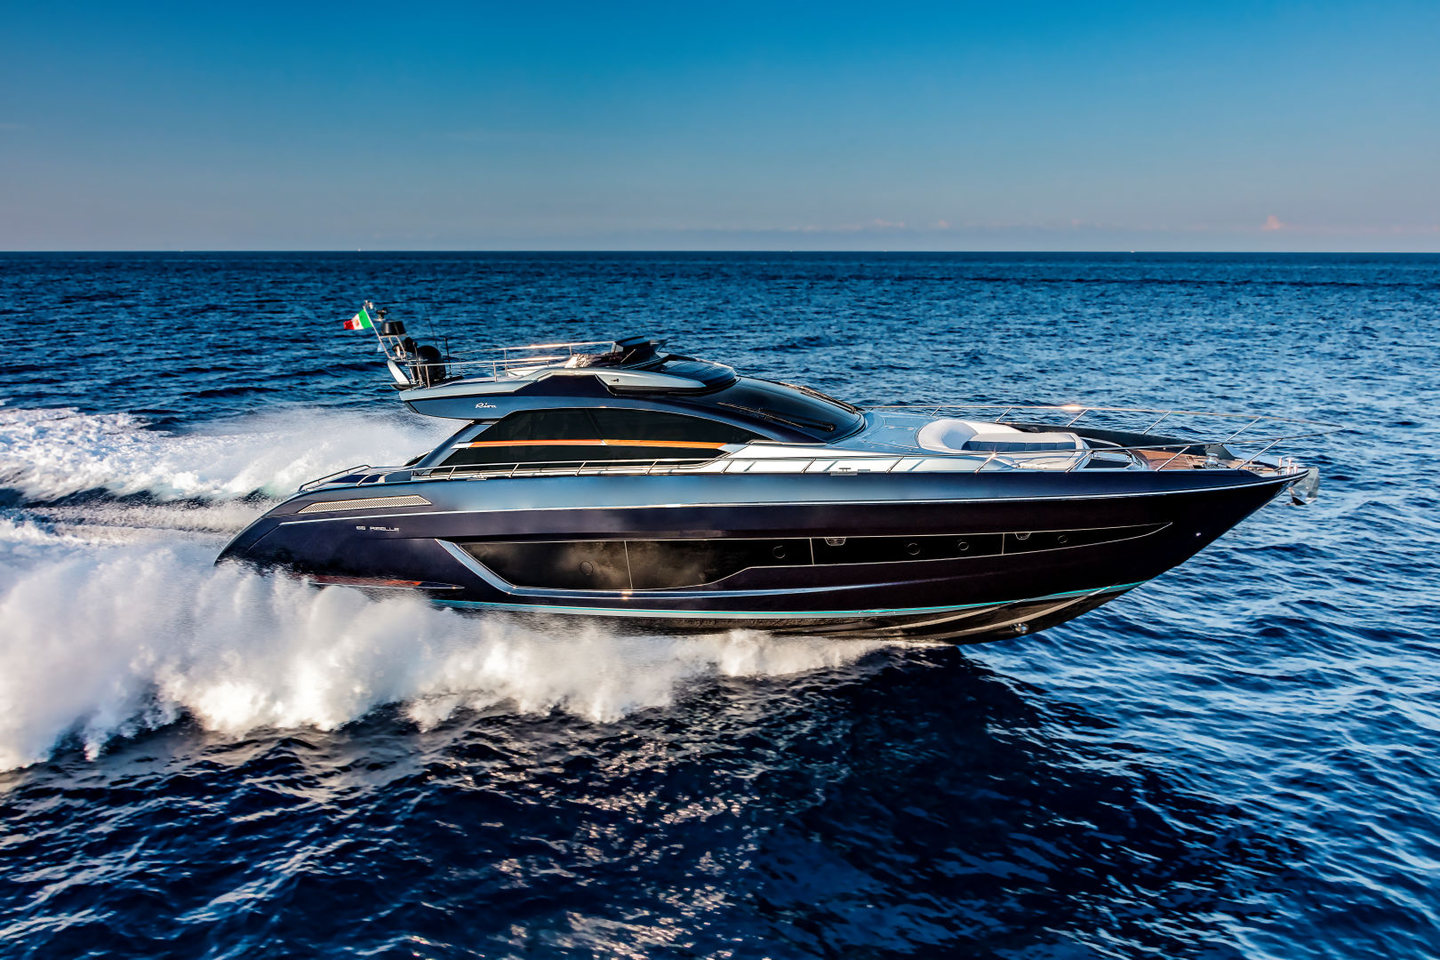 360 VR Virtual Tours of the Riva 66 Ribelle